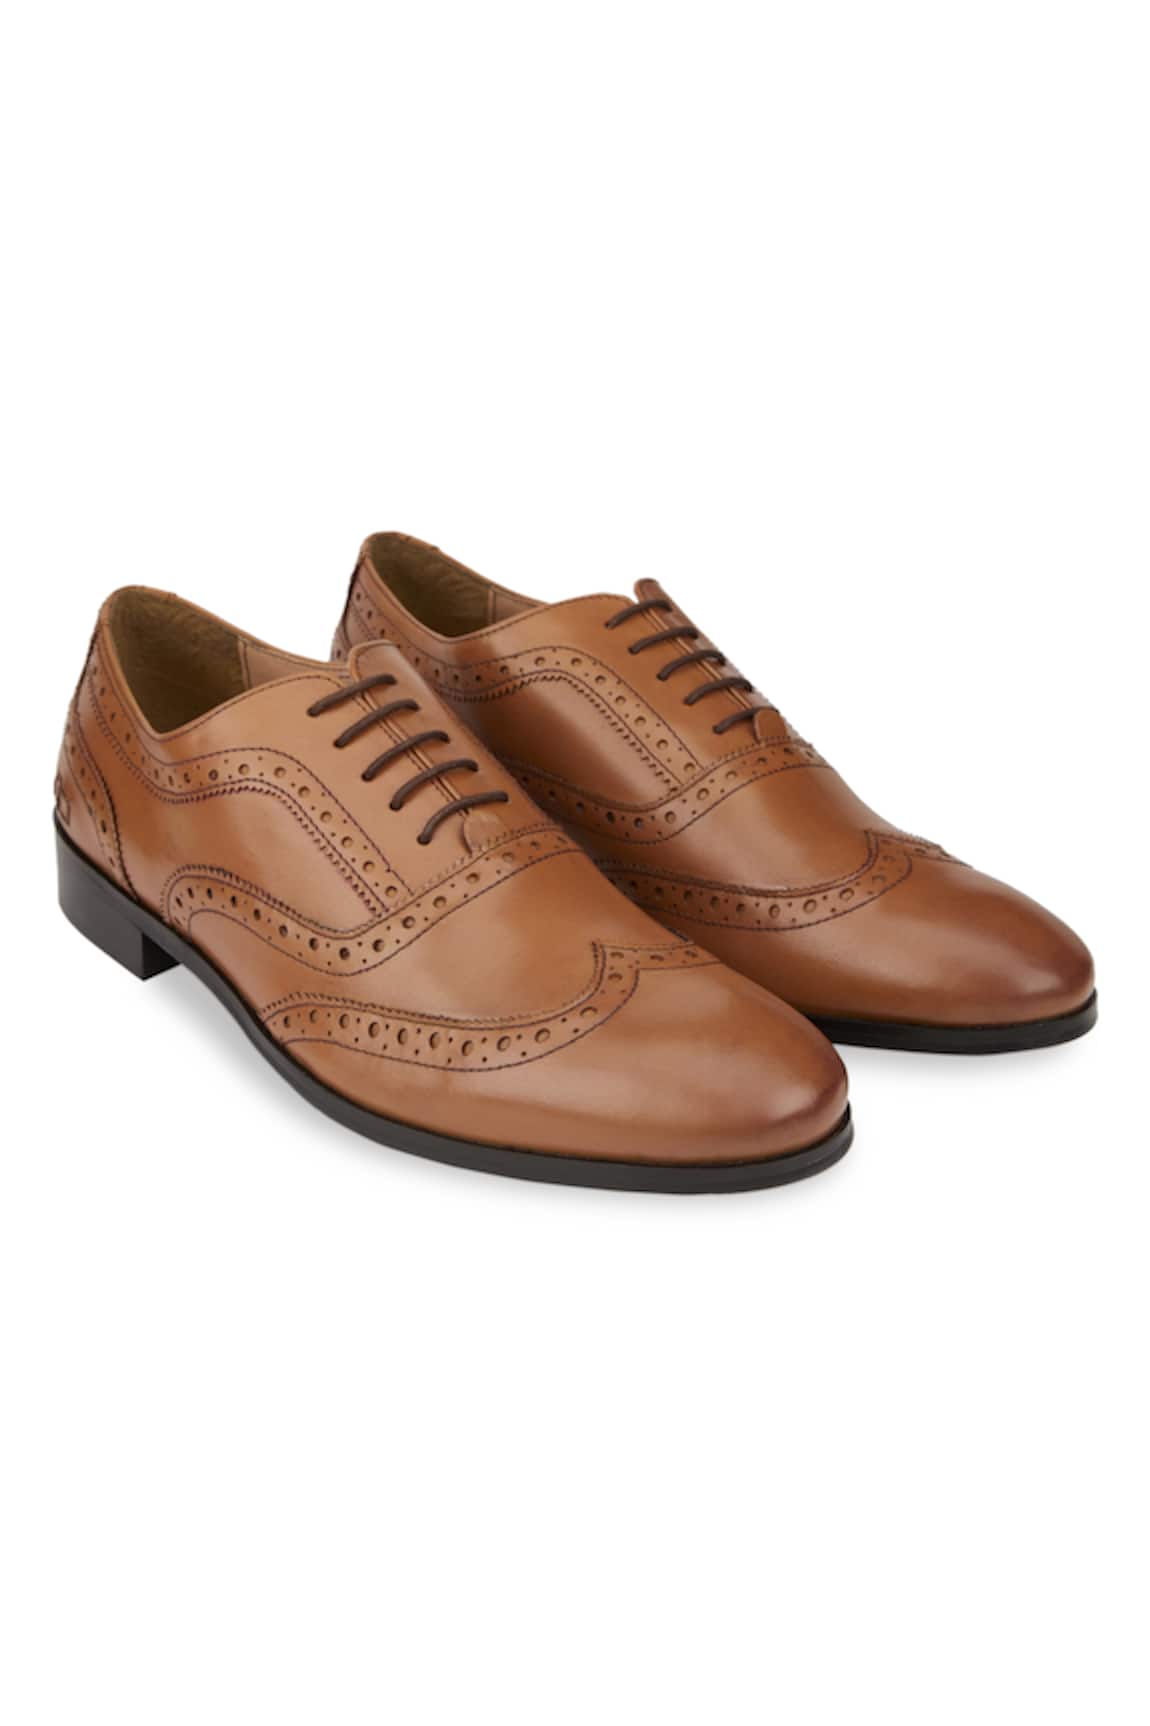 Hats Off Accessories Genuine Leather Cut Work Loafers